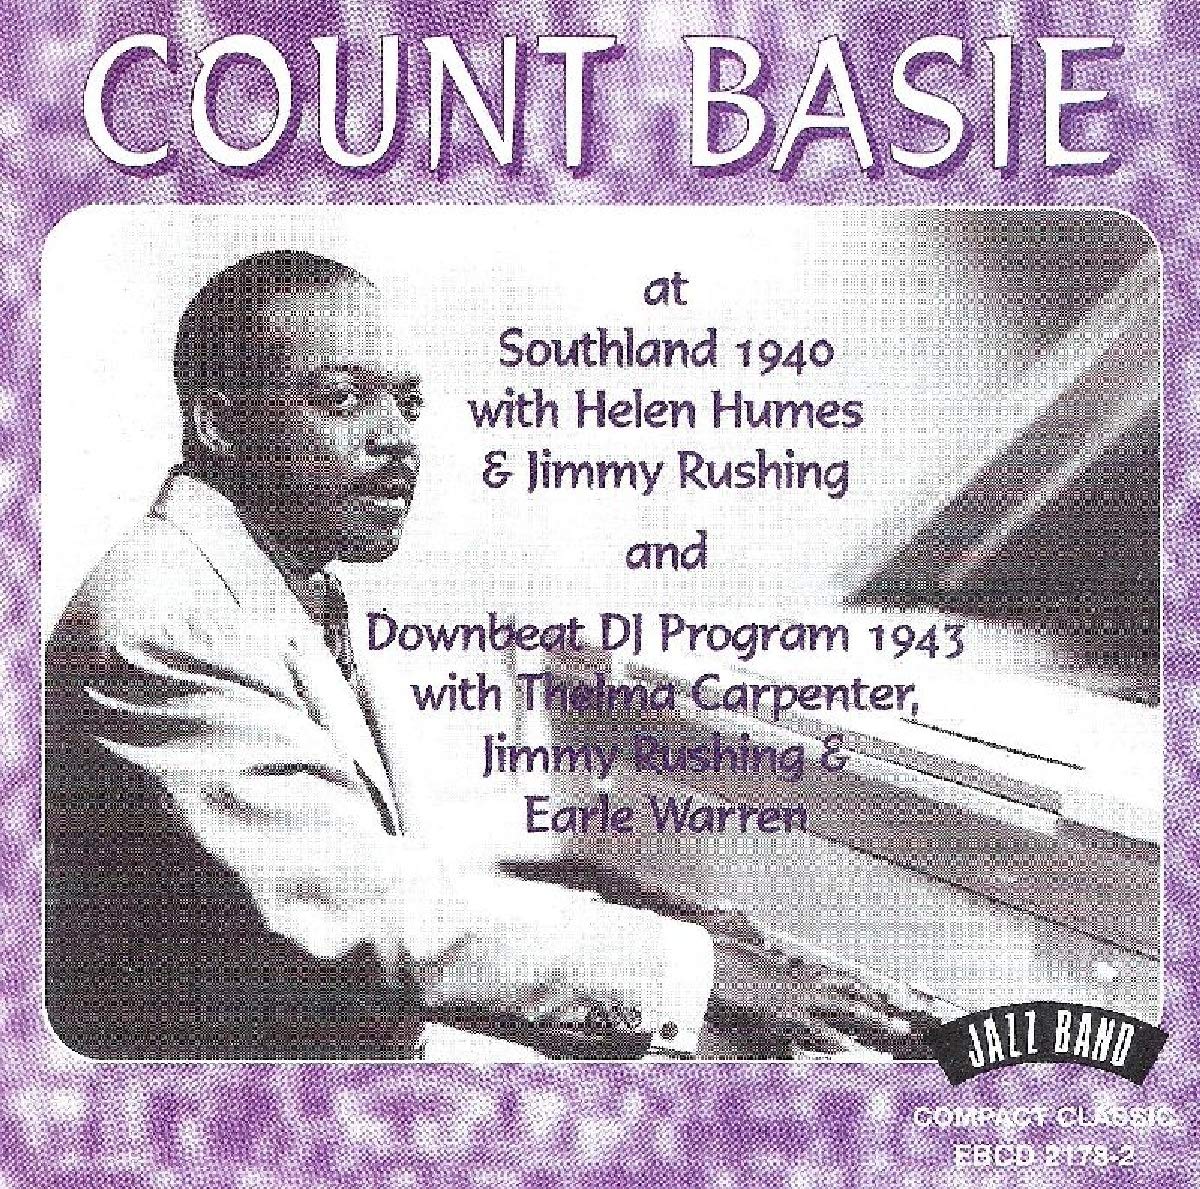 COUNT BASIE: Count Basie At Southland